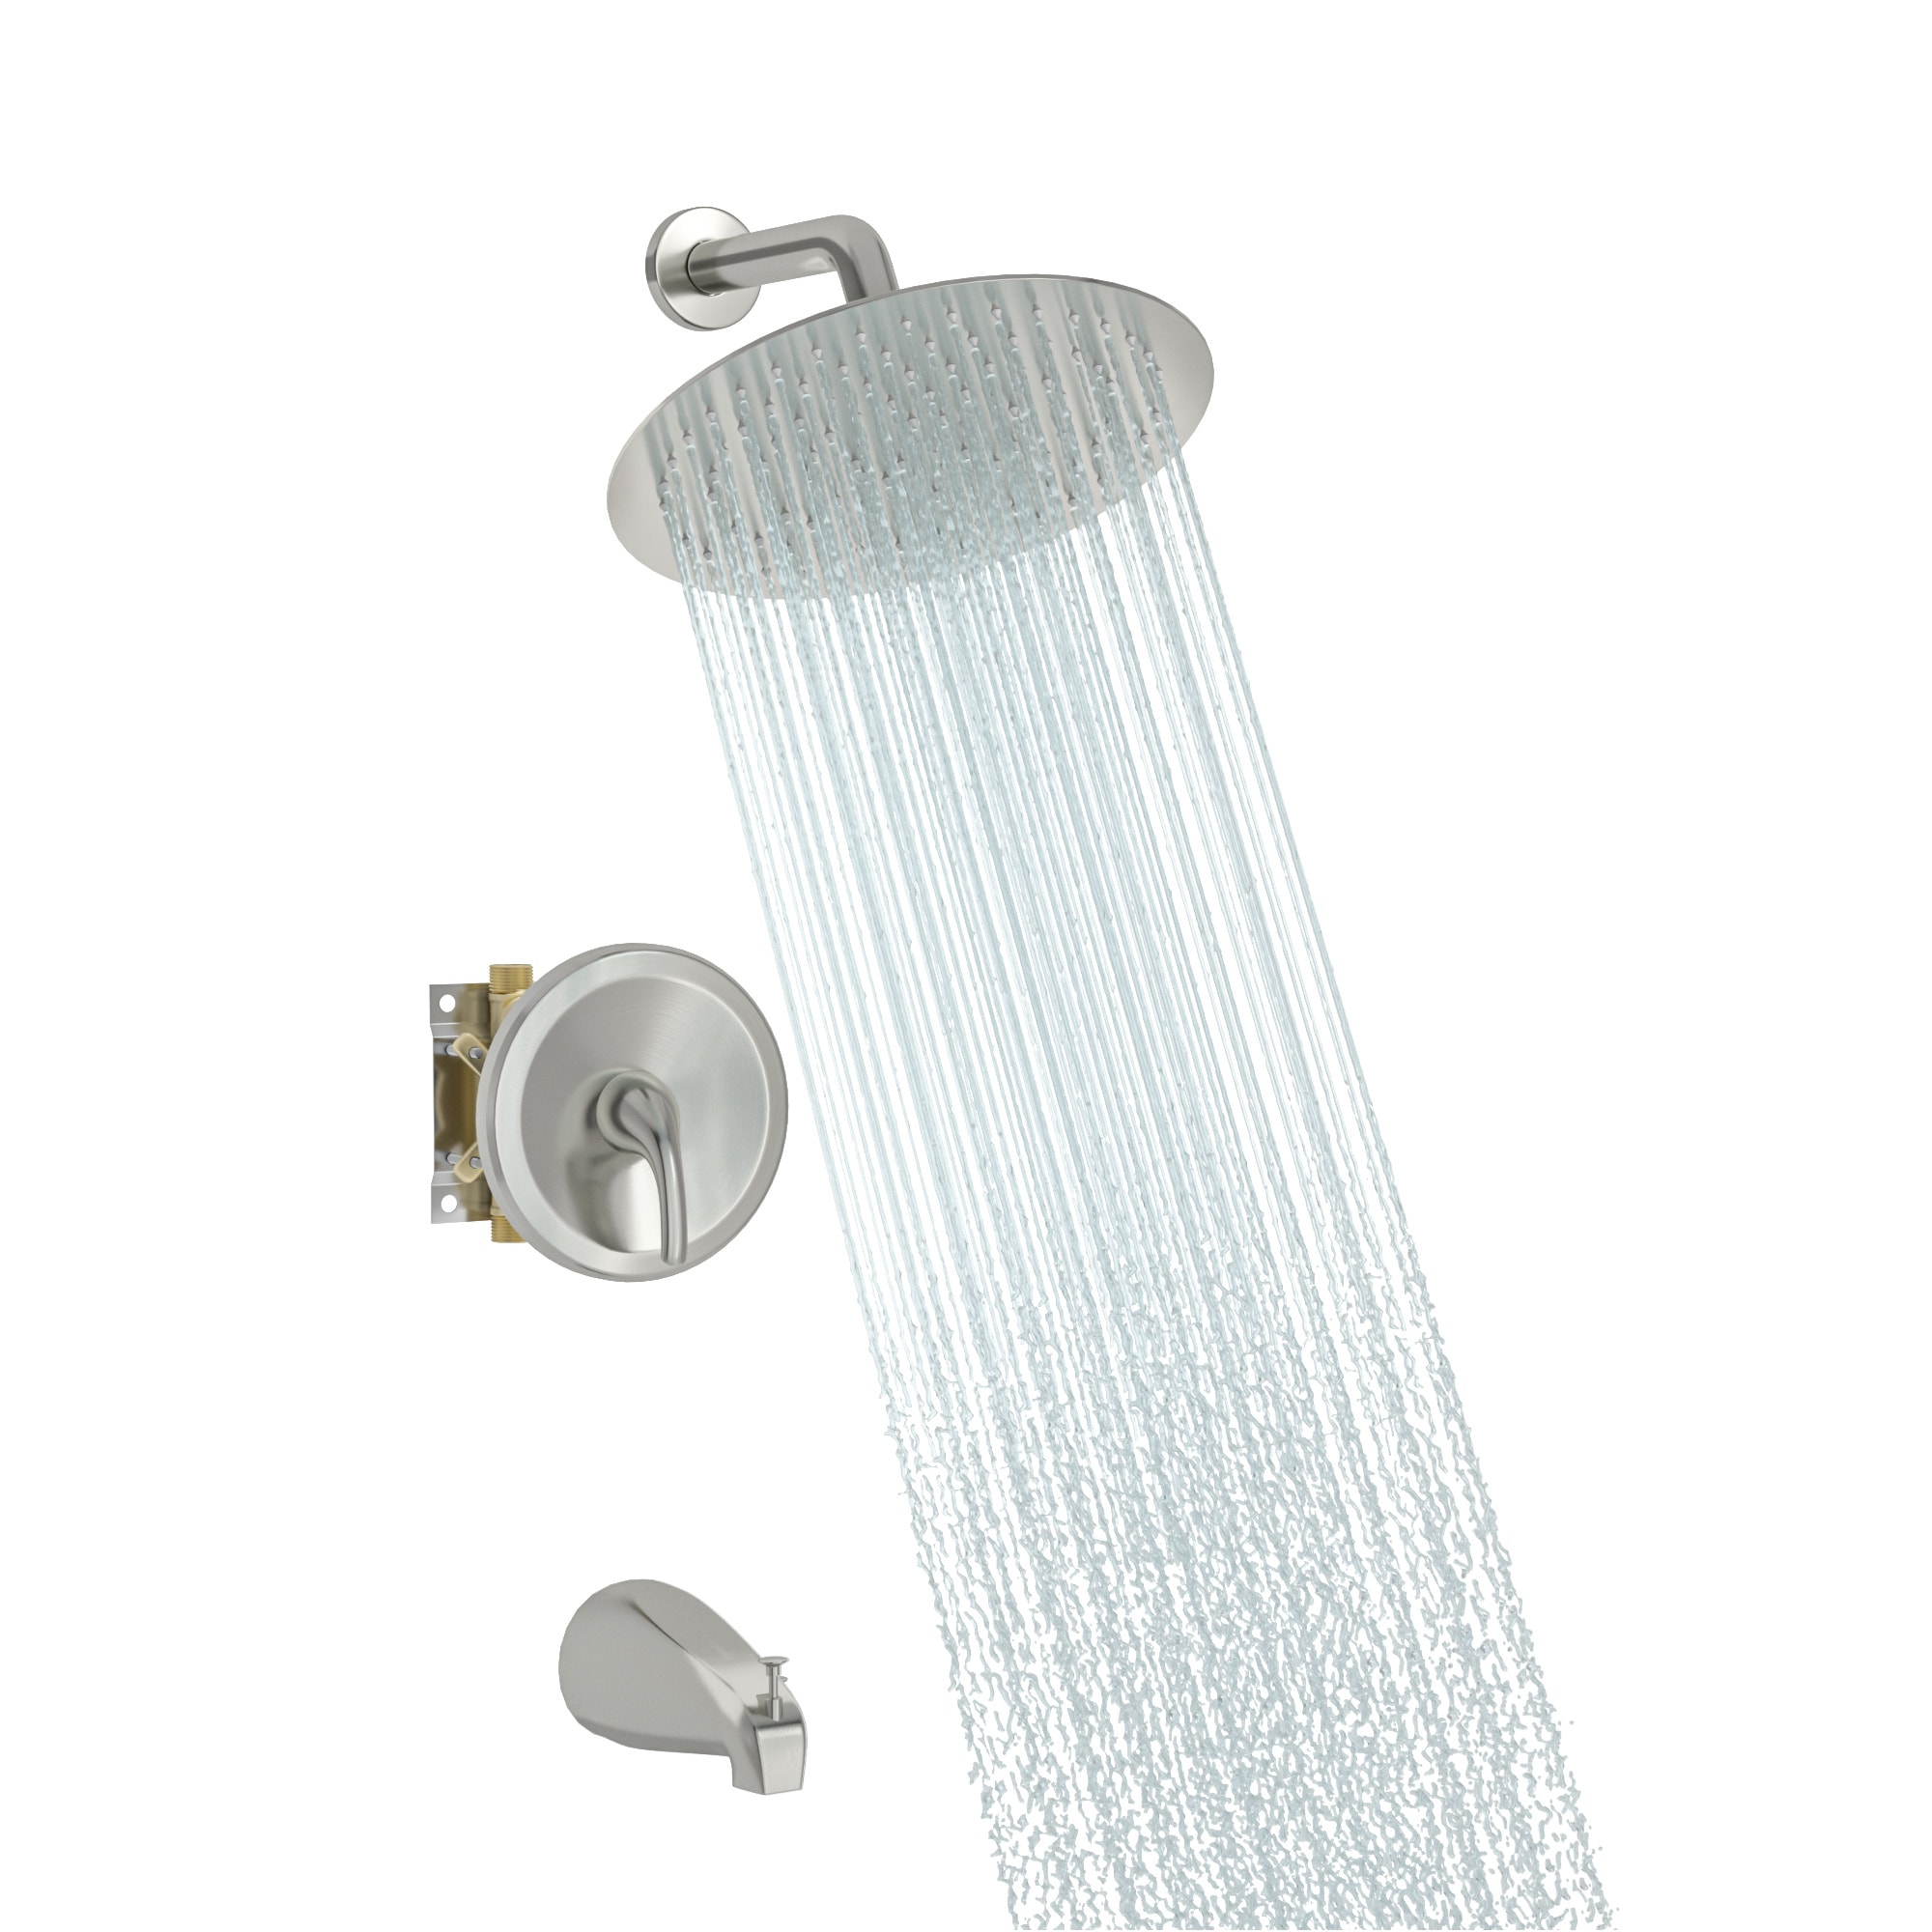 KICHAE 10-Inch Round Waterfall Shower Head Brushed Nickel Dual Head  Waterfall Built-In Shower Faucet System with 2-way Diverter Valve Included  in the Shower Systems department at